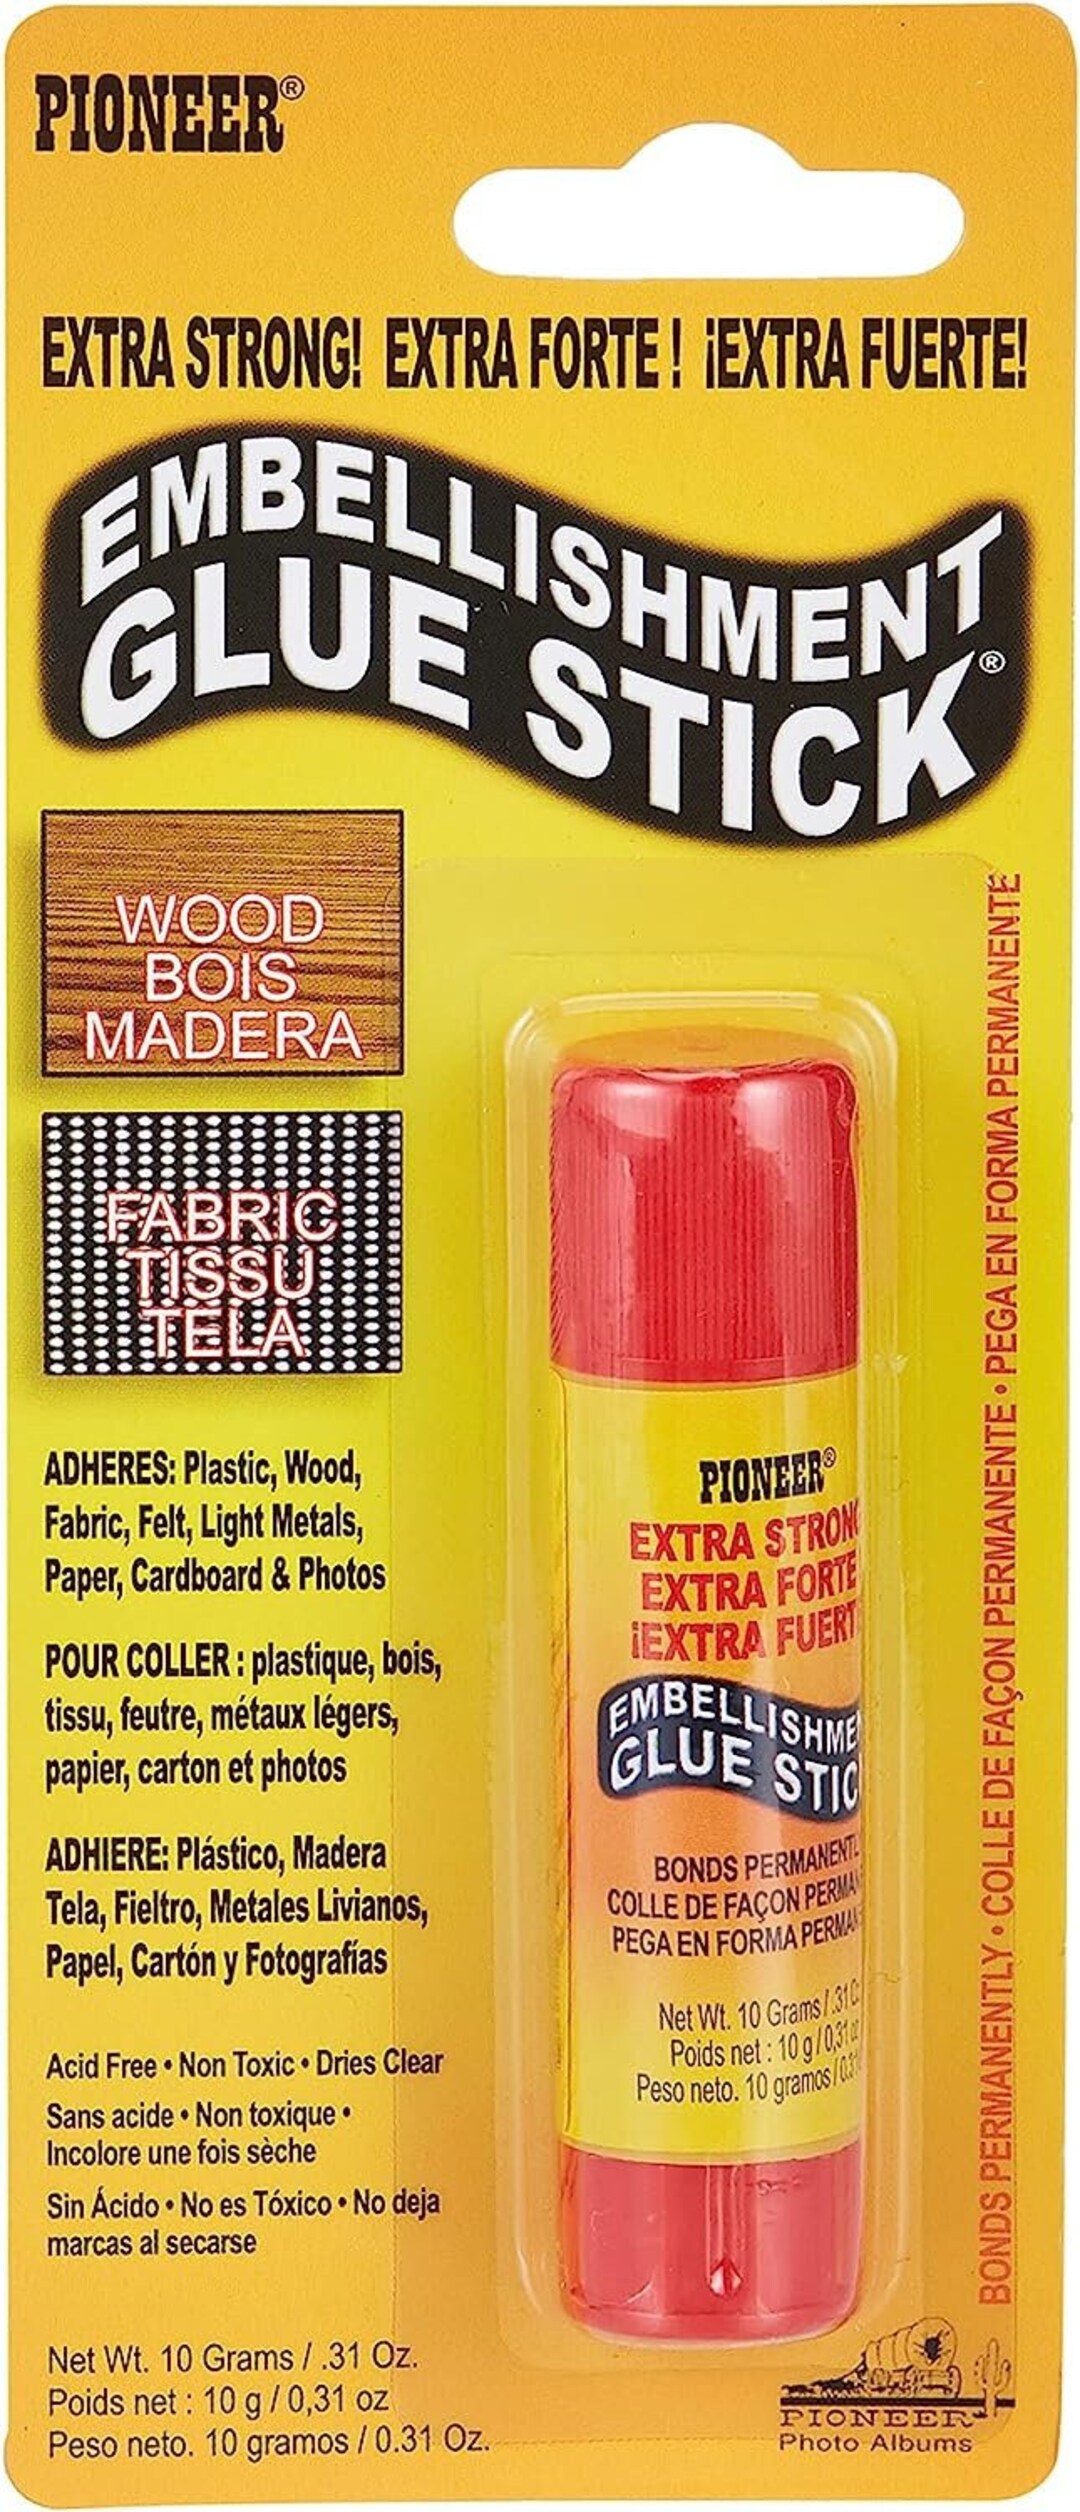 powerful and non-toxic paper glue stick